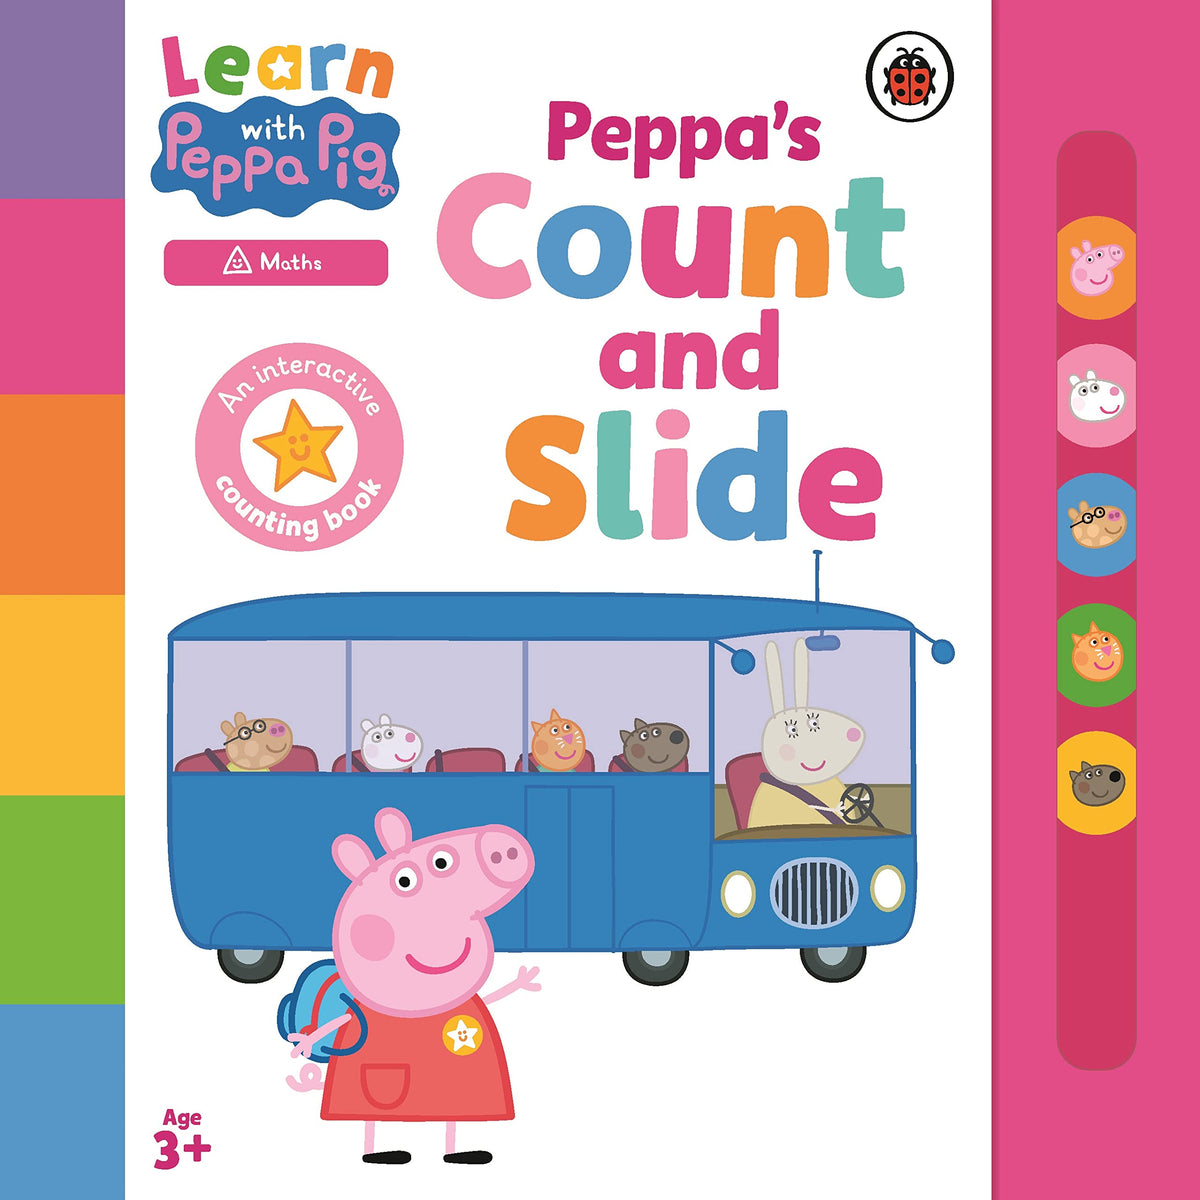 Learn with Peppa: Peppas Count and Slide